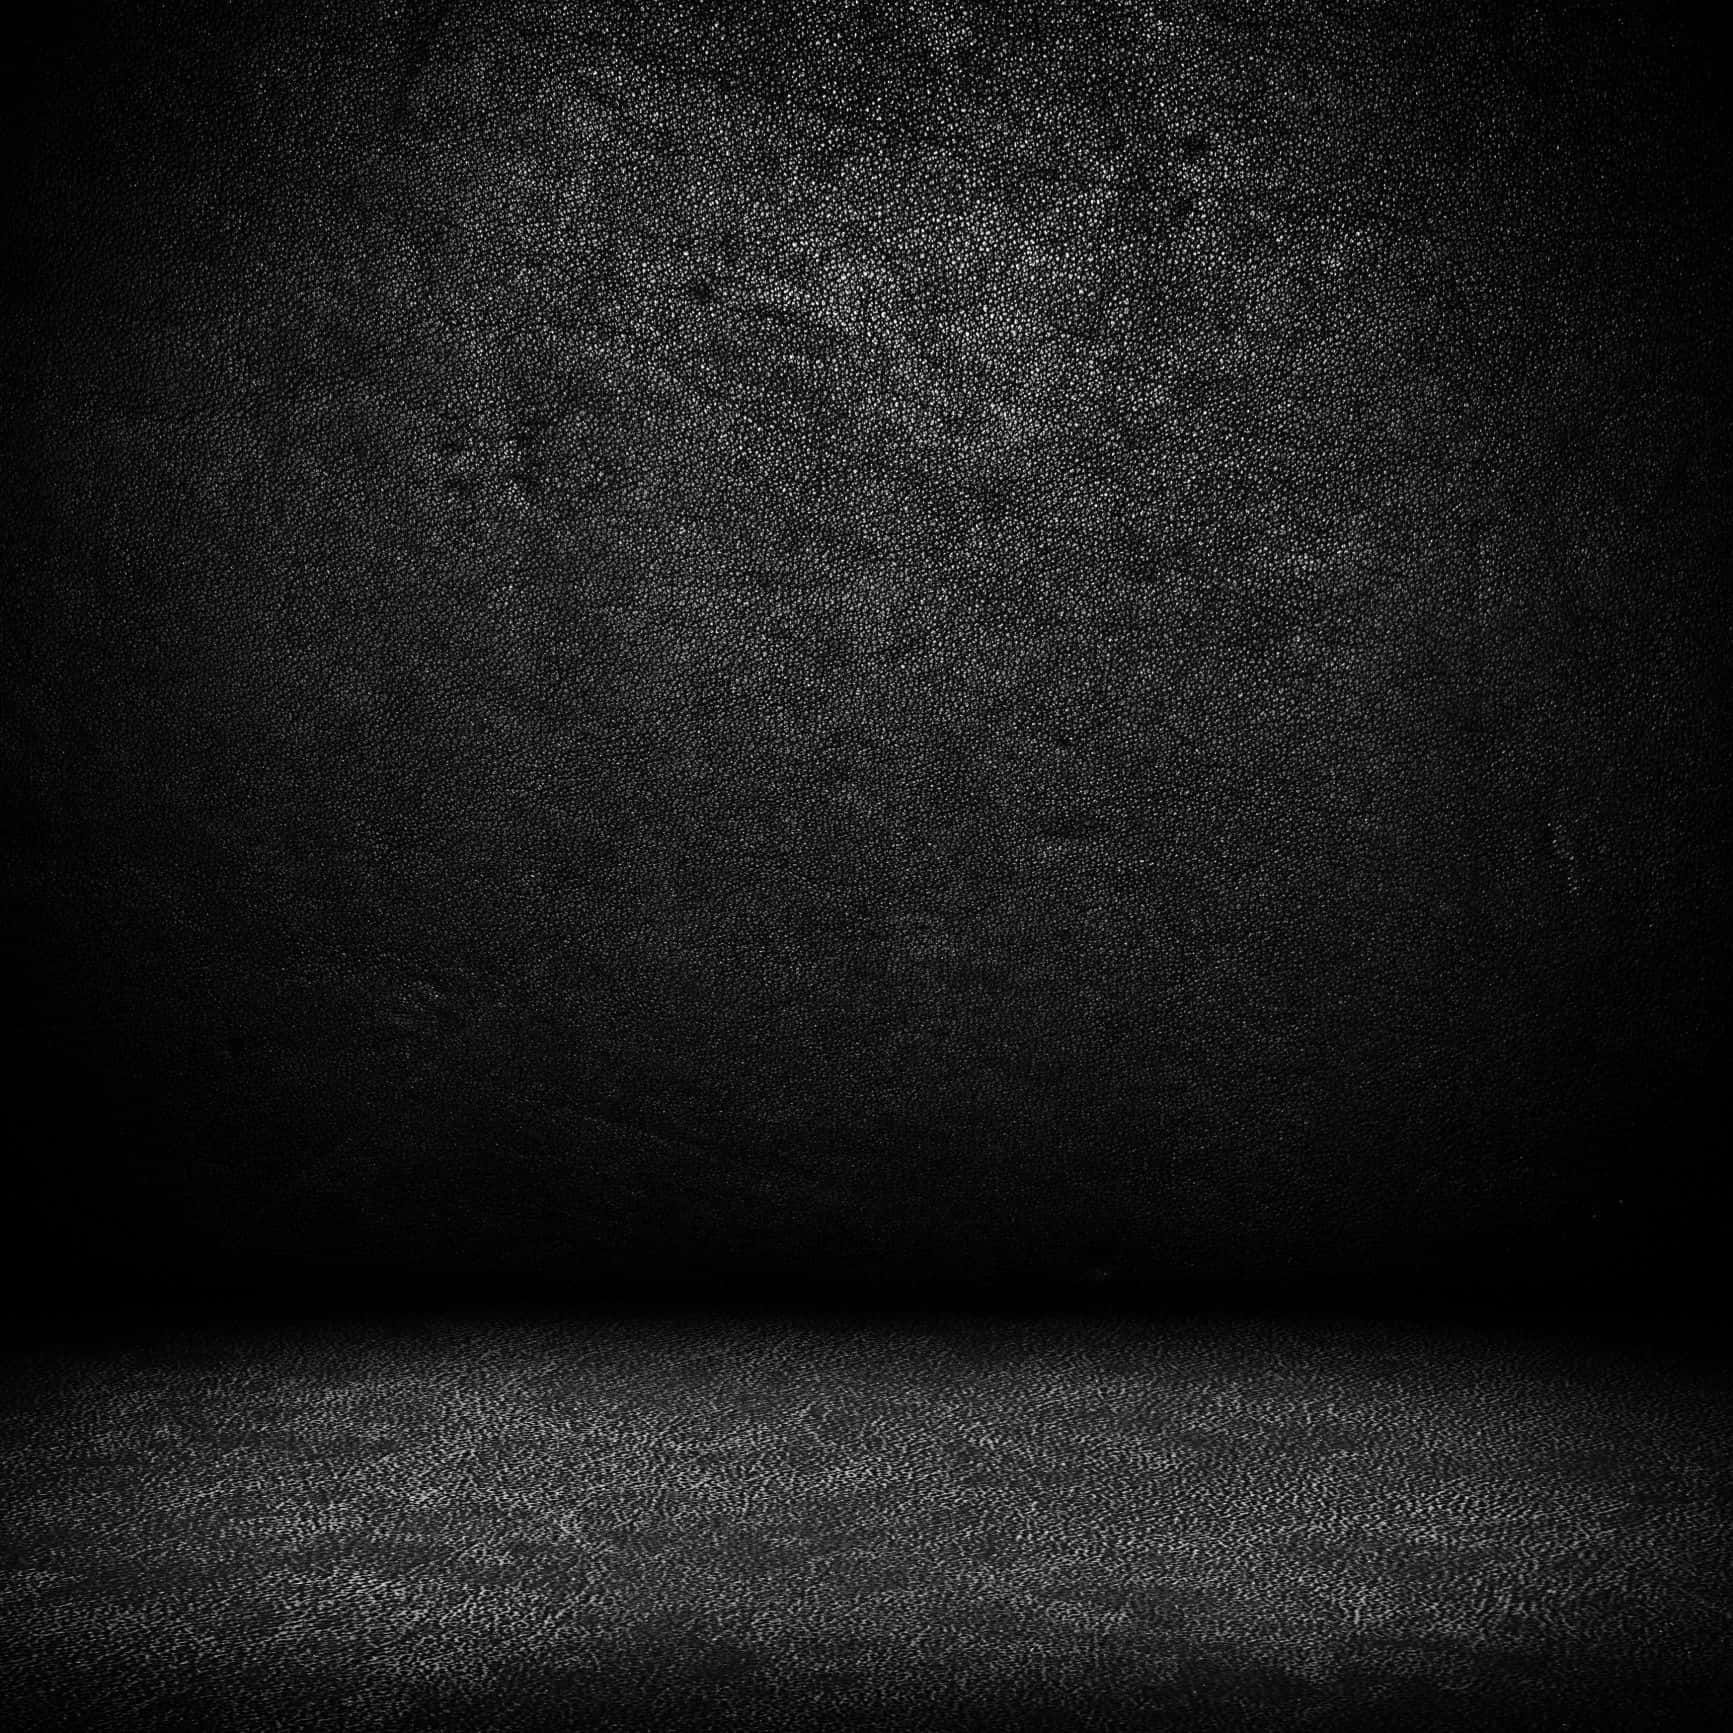 Download Dark Wall 1733 X 1733 Background | Wallpapers.com